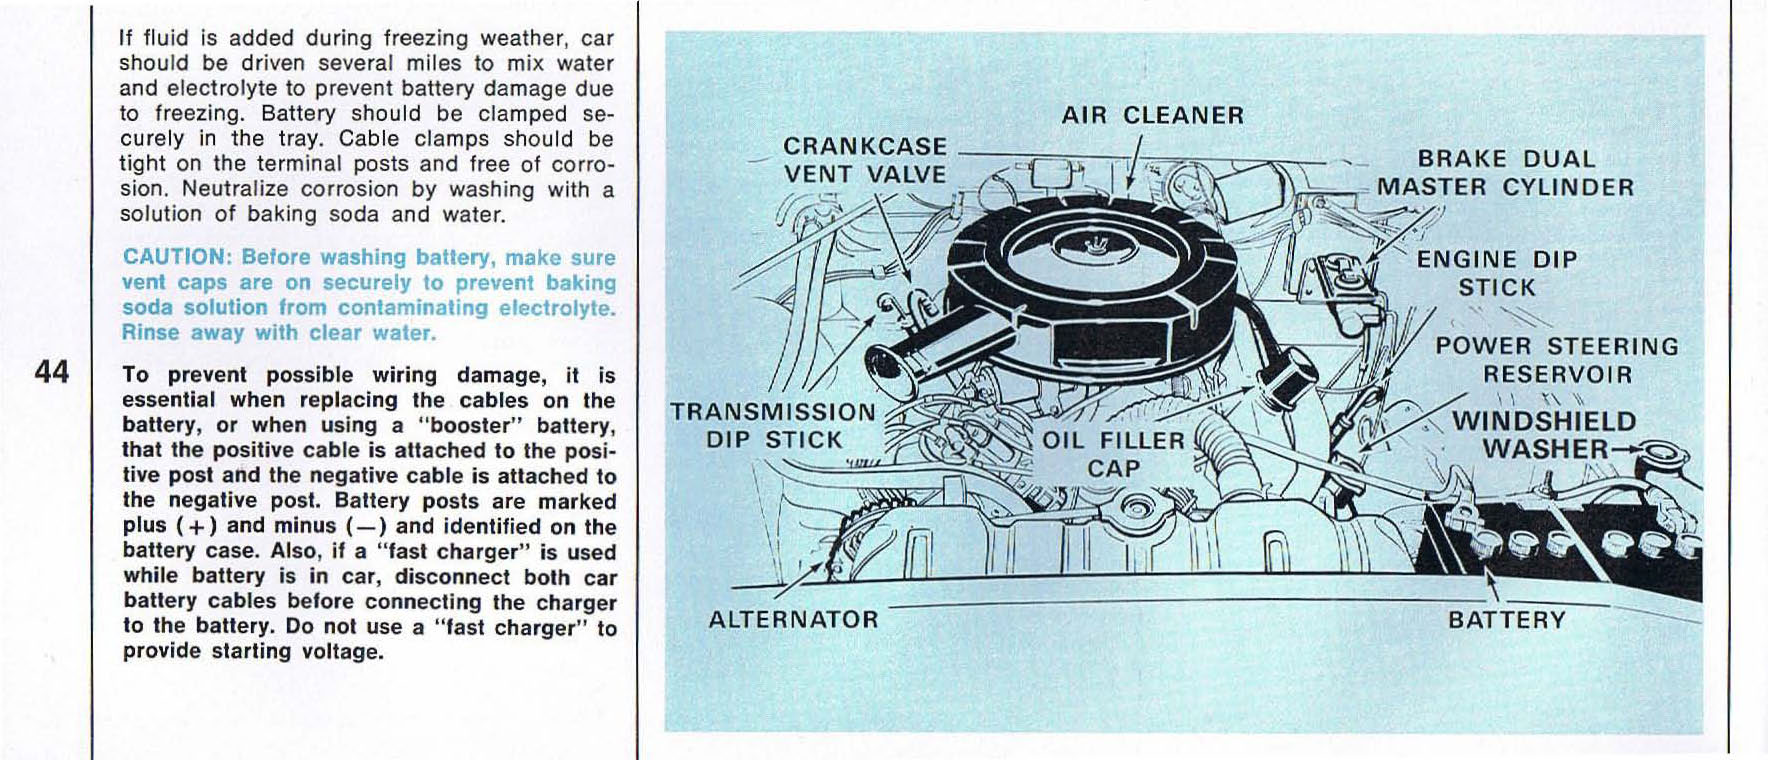 1969_Plymouth_Fury_Owners_Manual-44